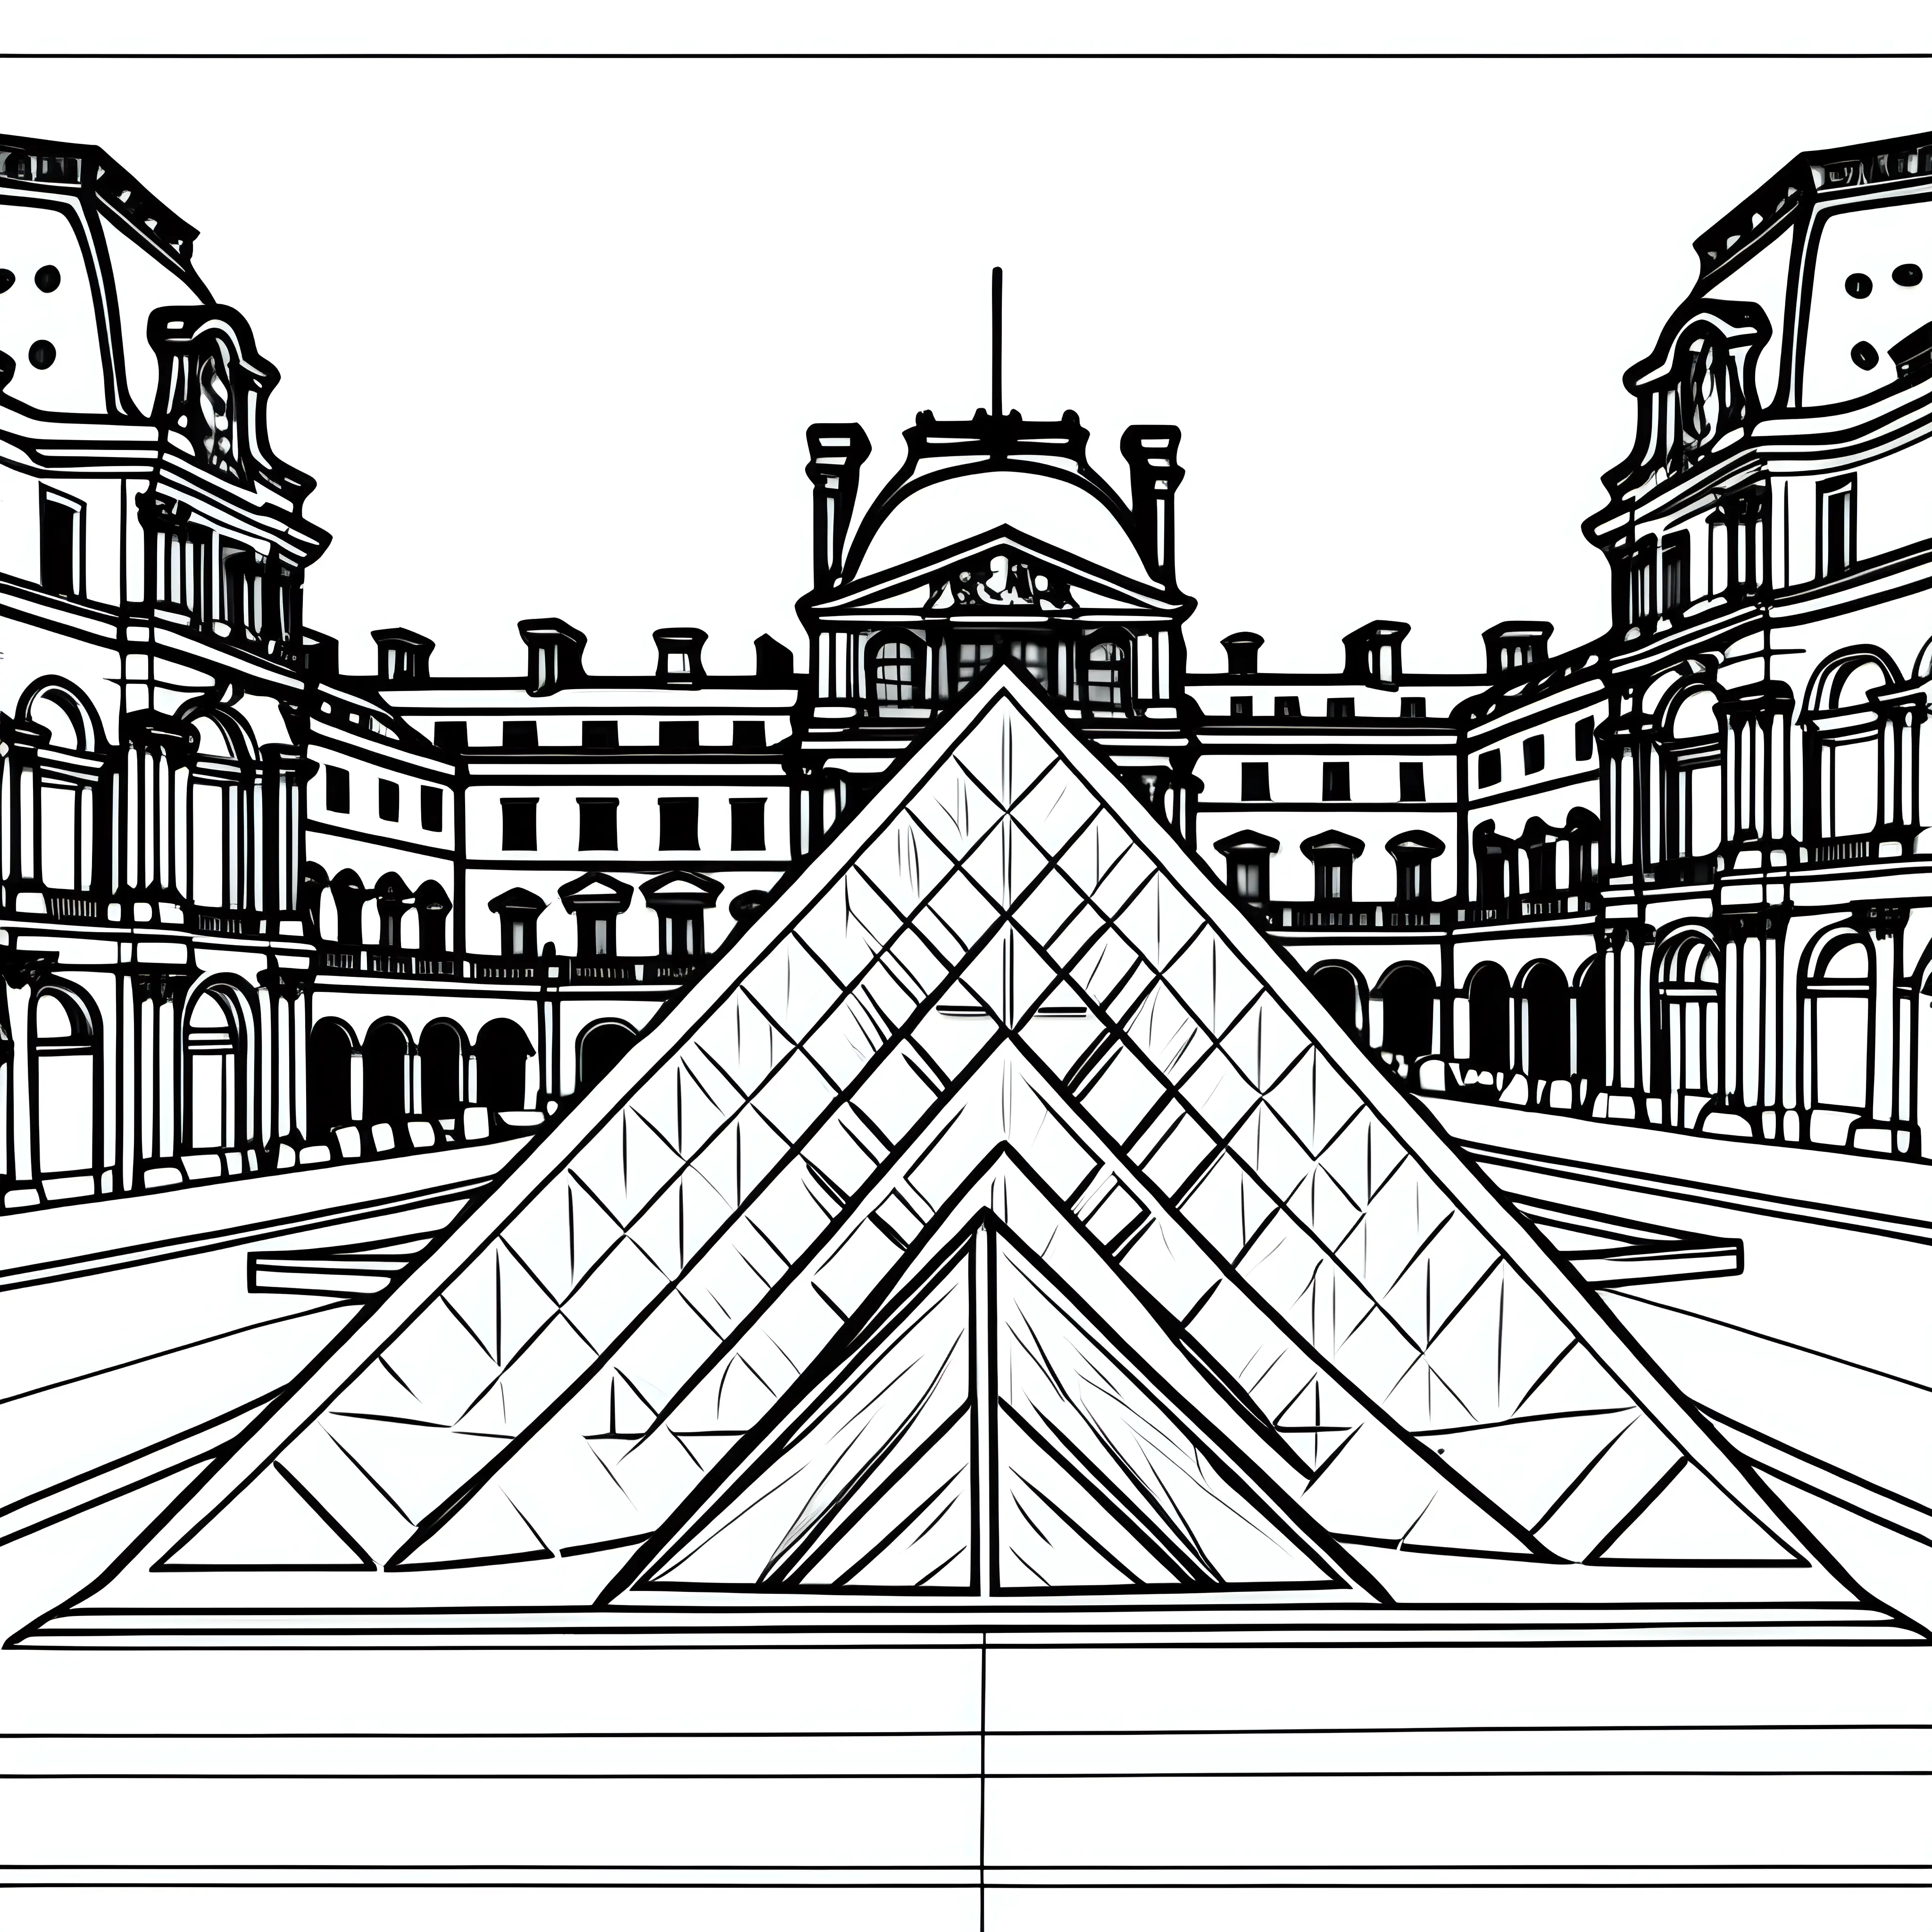 Artistic Louvre Museum Coloring Page for Creative Fun